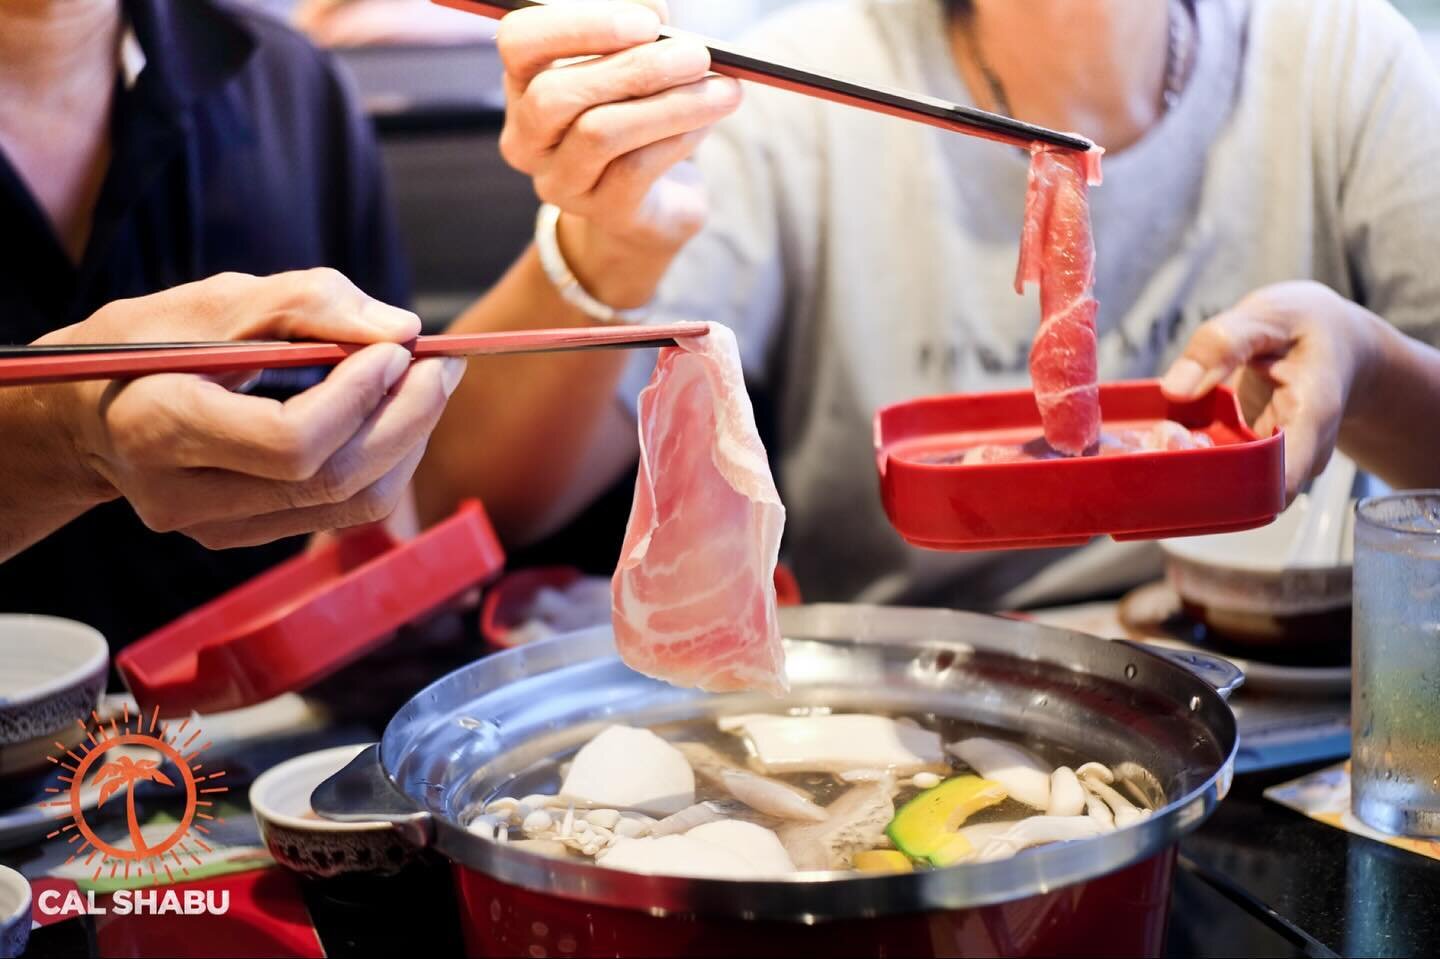 🍲 Rainy Fridays call for the warm embrace of Shabu Shabu. Dive into a pot full of fresh vegetables and experience the magic of swishing marbled pork and beef slices. Shabu Shabu - where every swish is a promise of flavor. Join us tonight and make yo